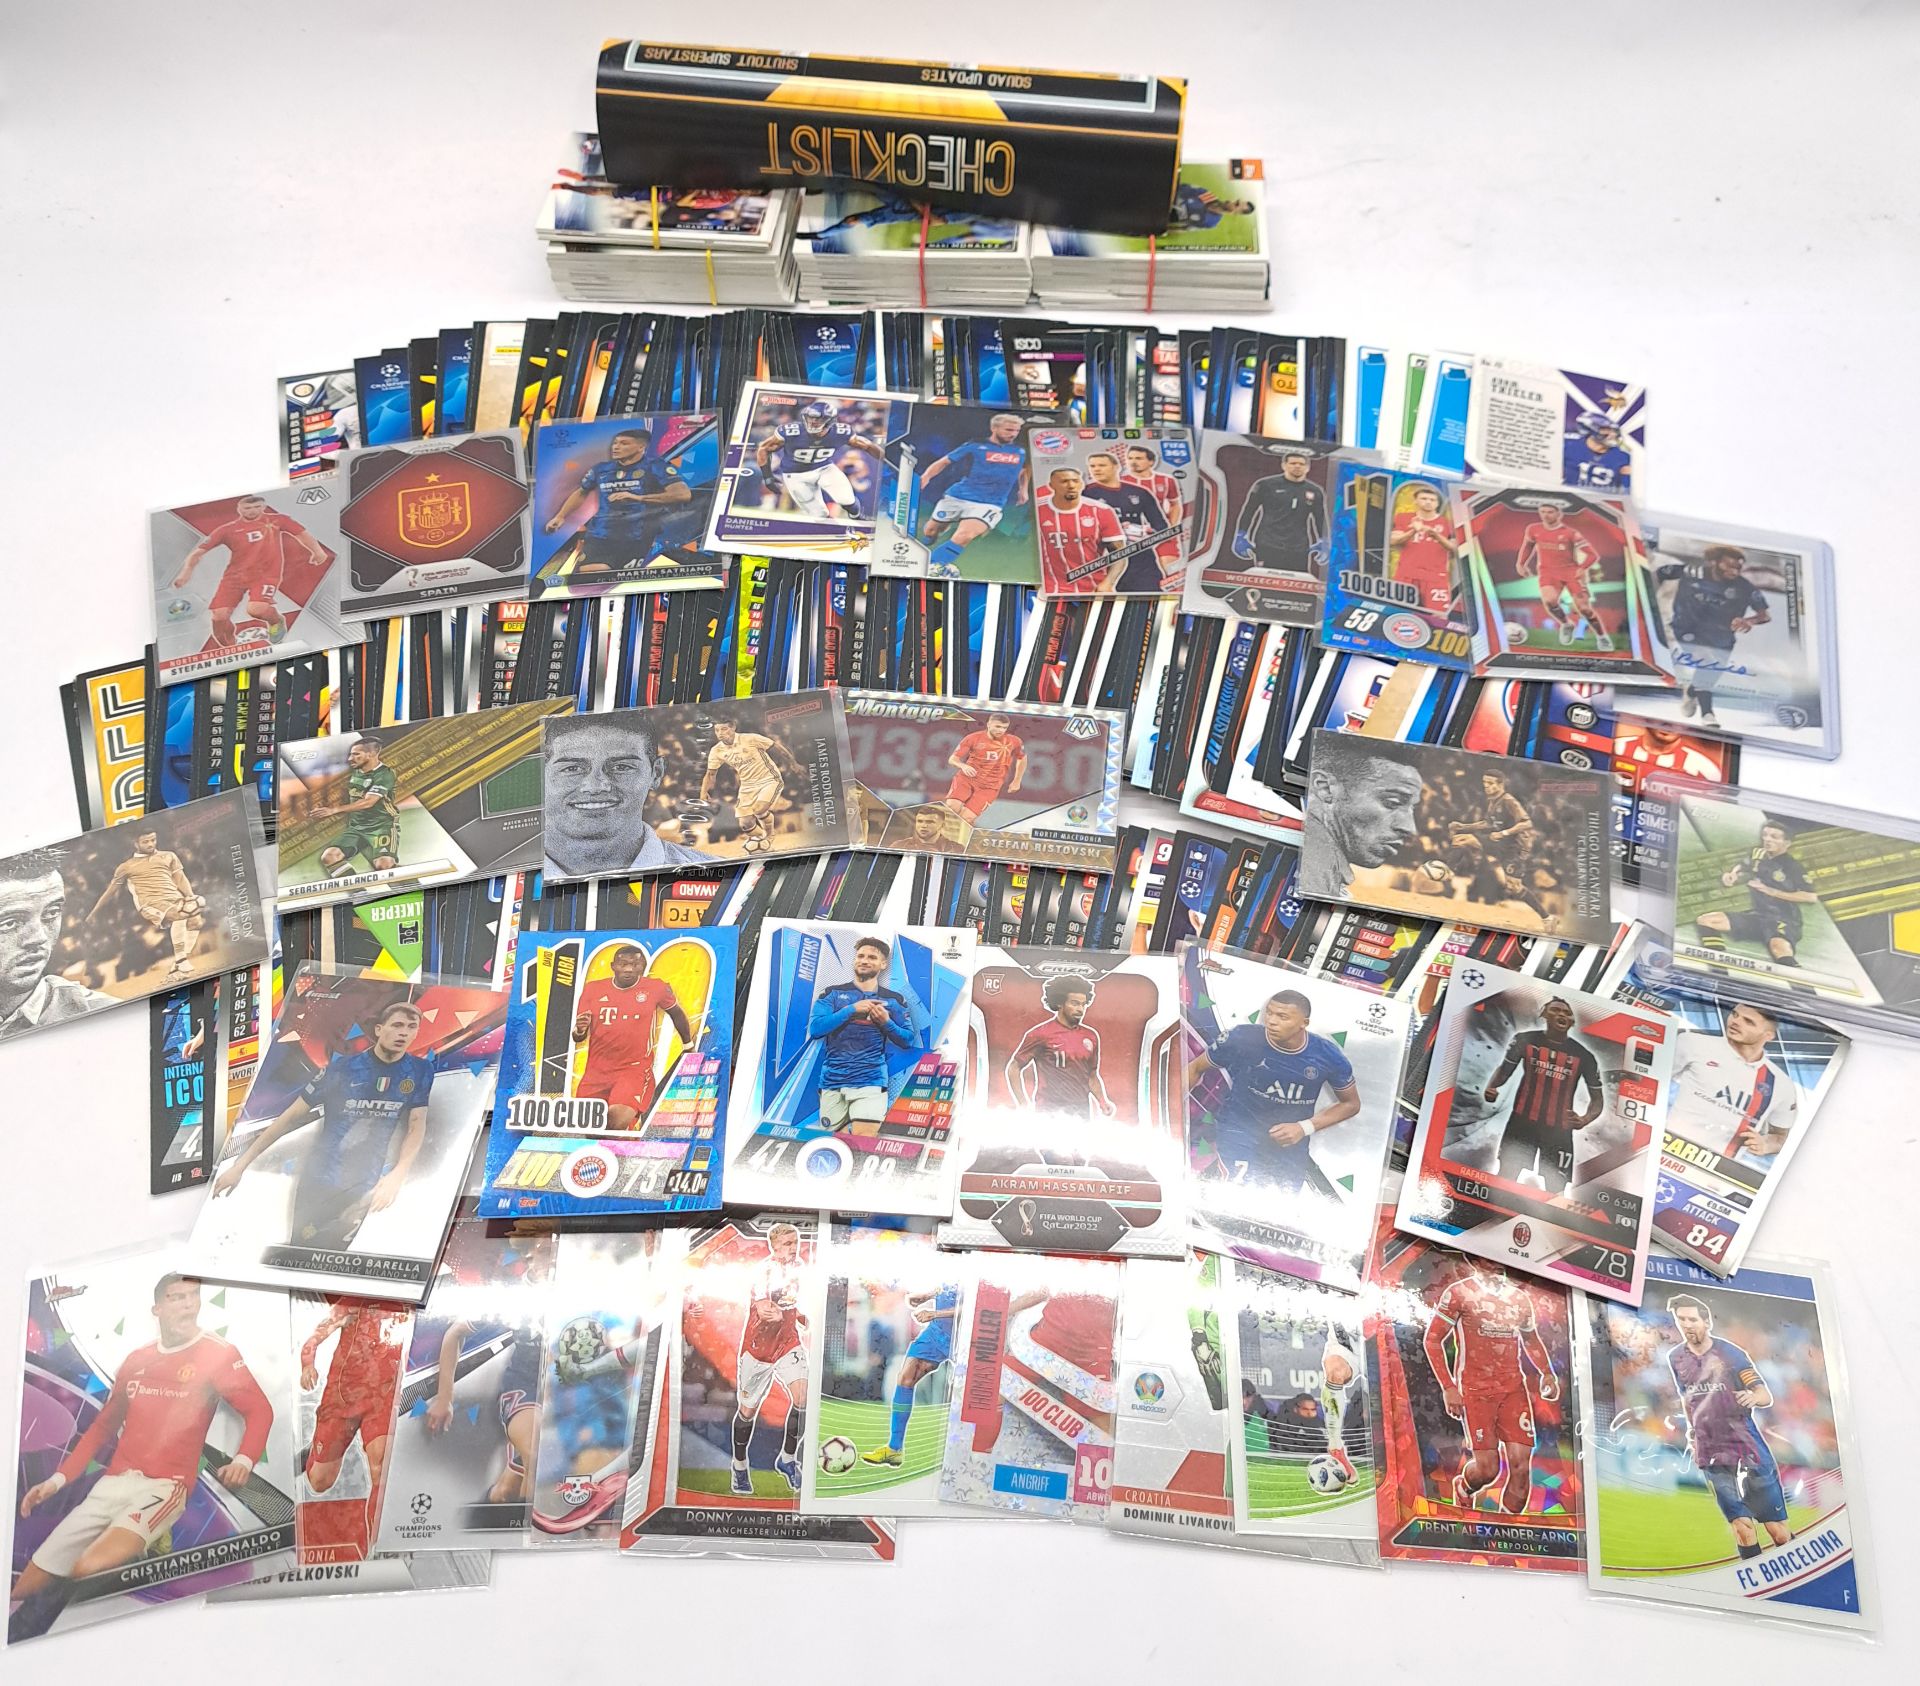 Quantity of Tops & Panini Football Trading Cards